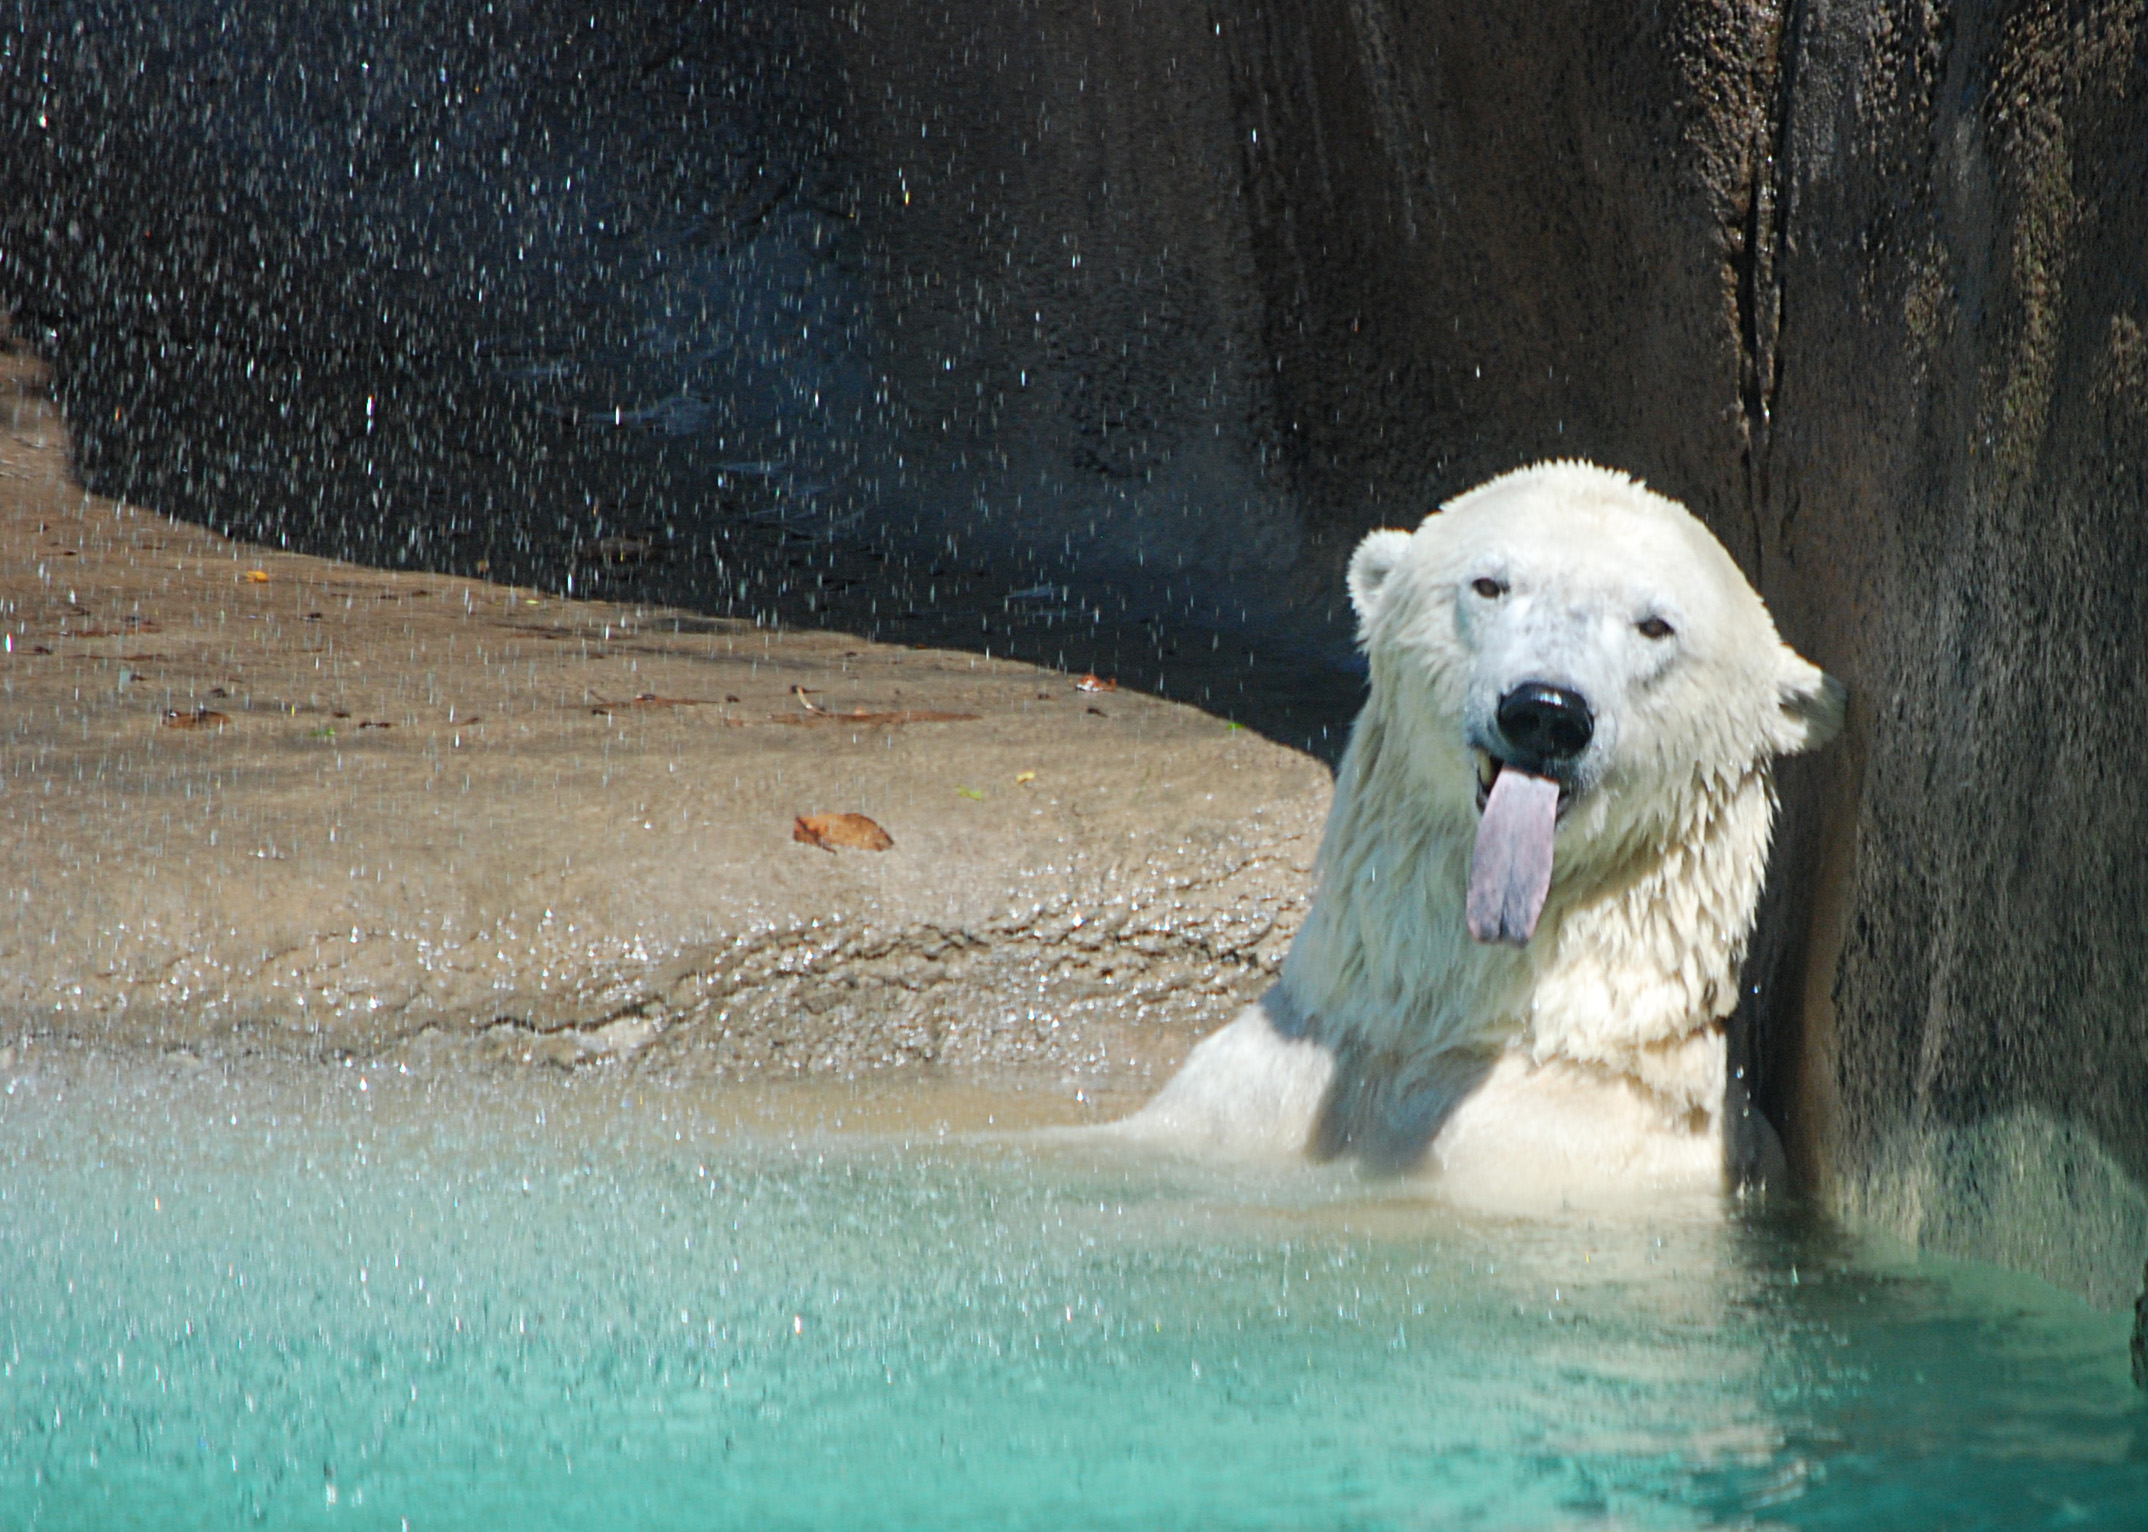 a polar bear sitting in some water with it's tongue out